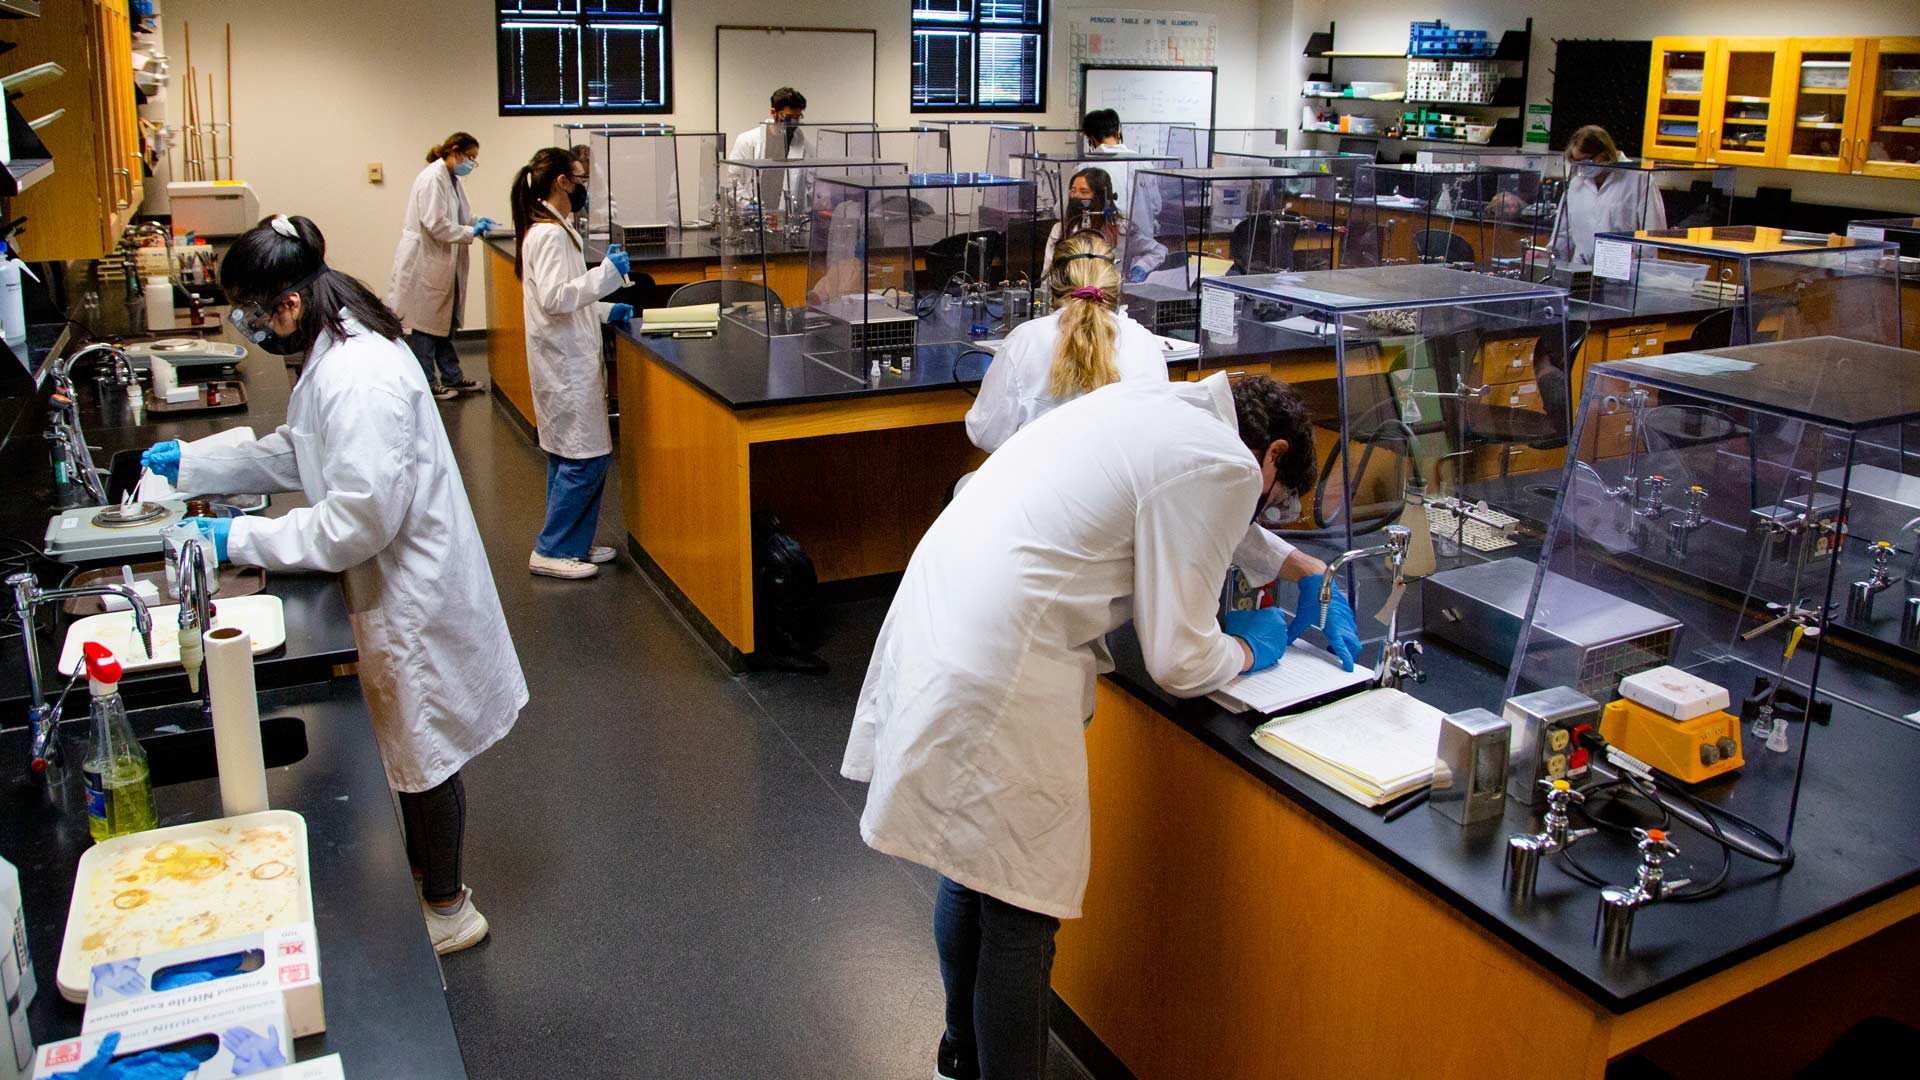 Students working on ASU's West campus